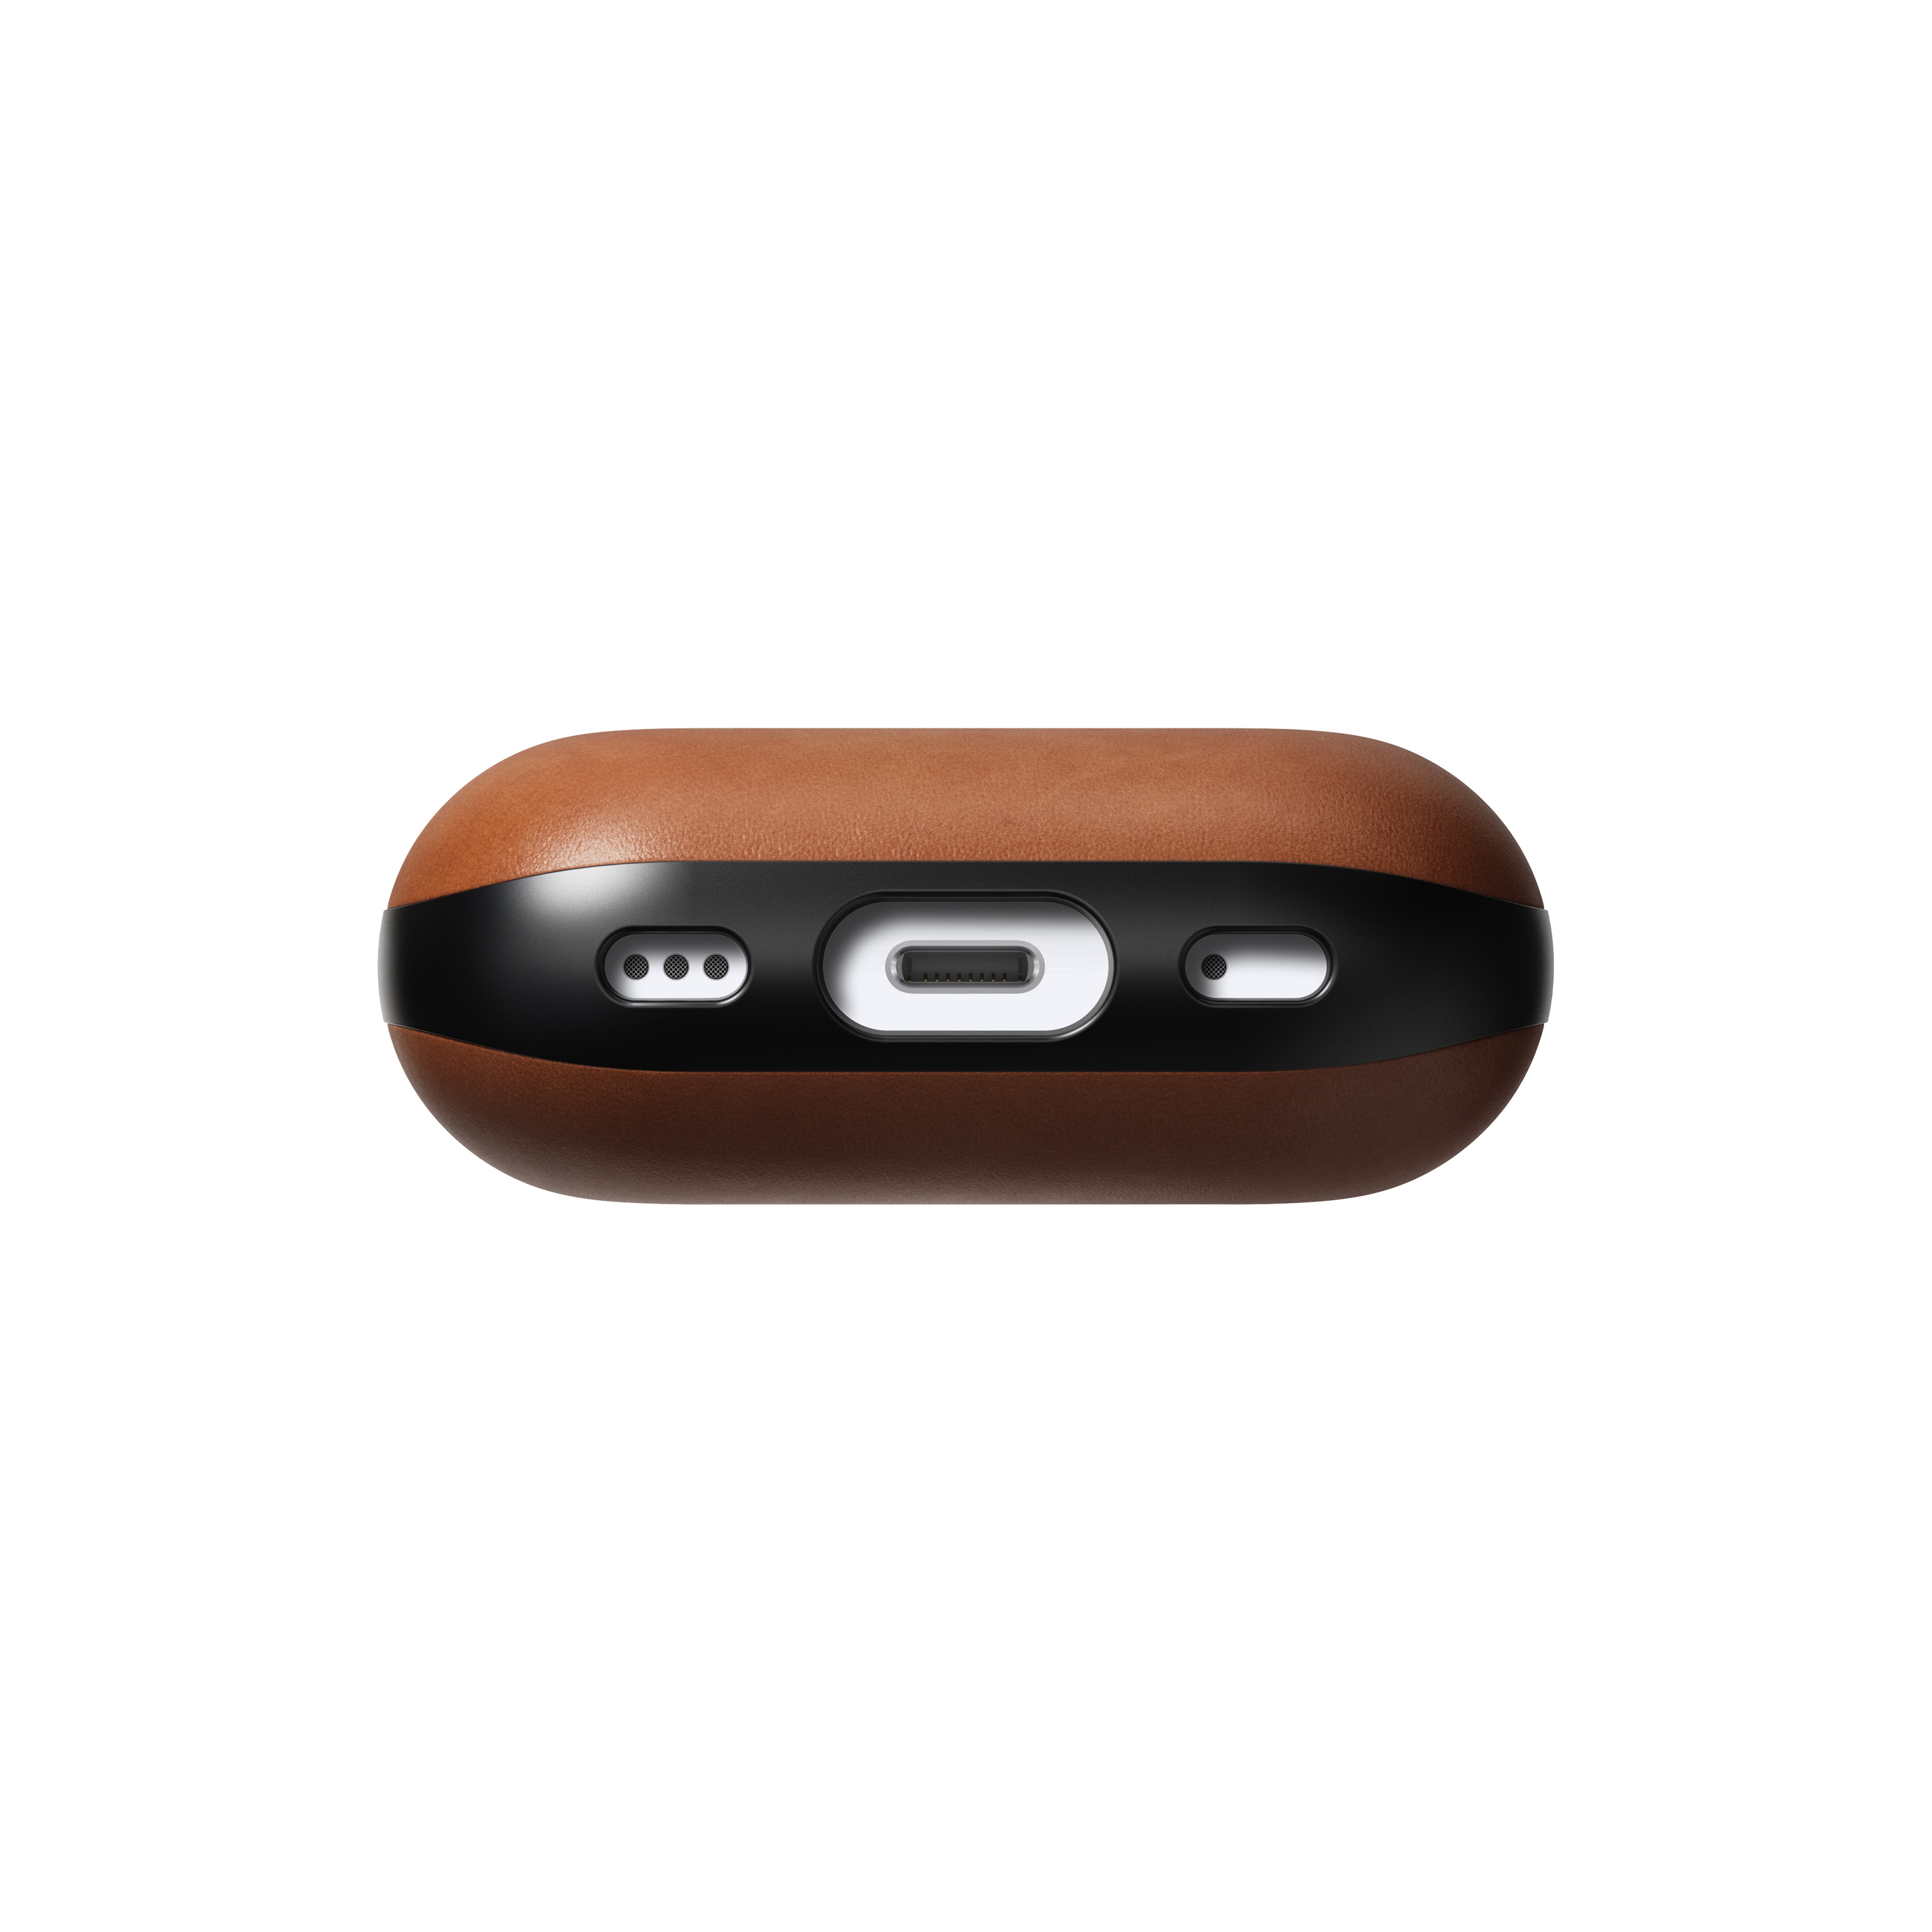 Nomad AirPods Pro 2 Modern Case Horween Leather English Tan